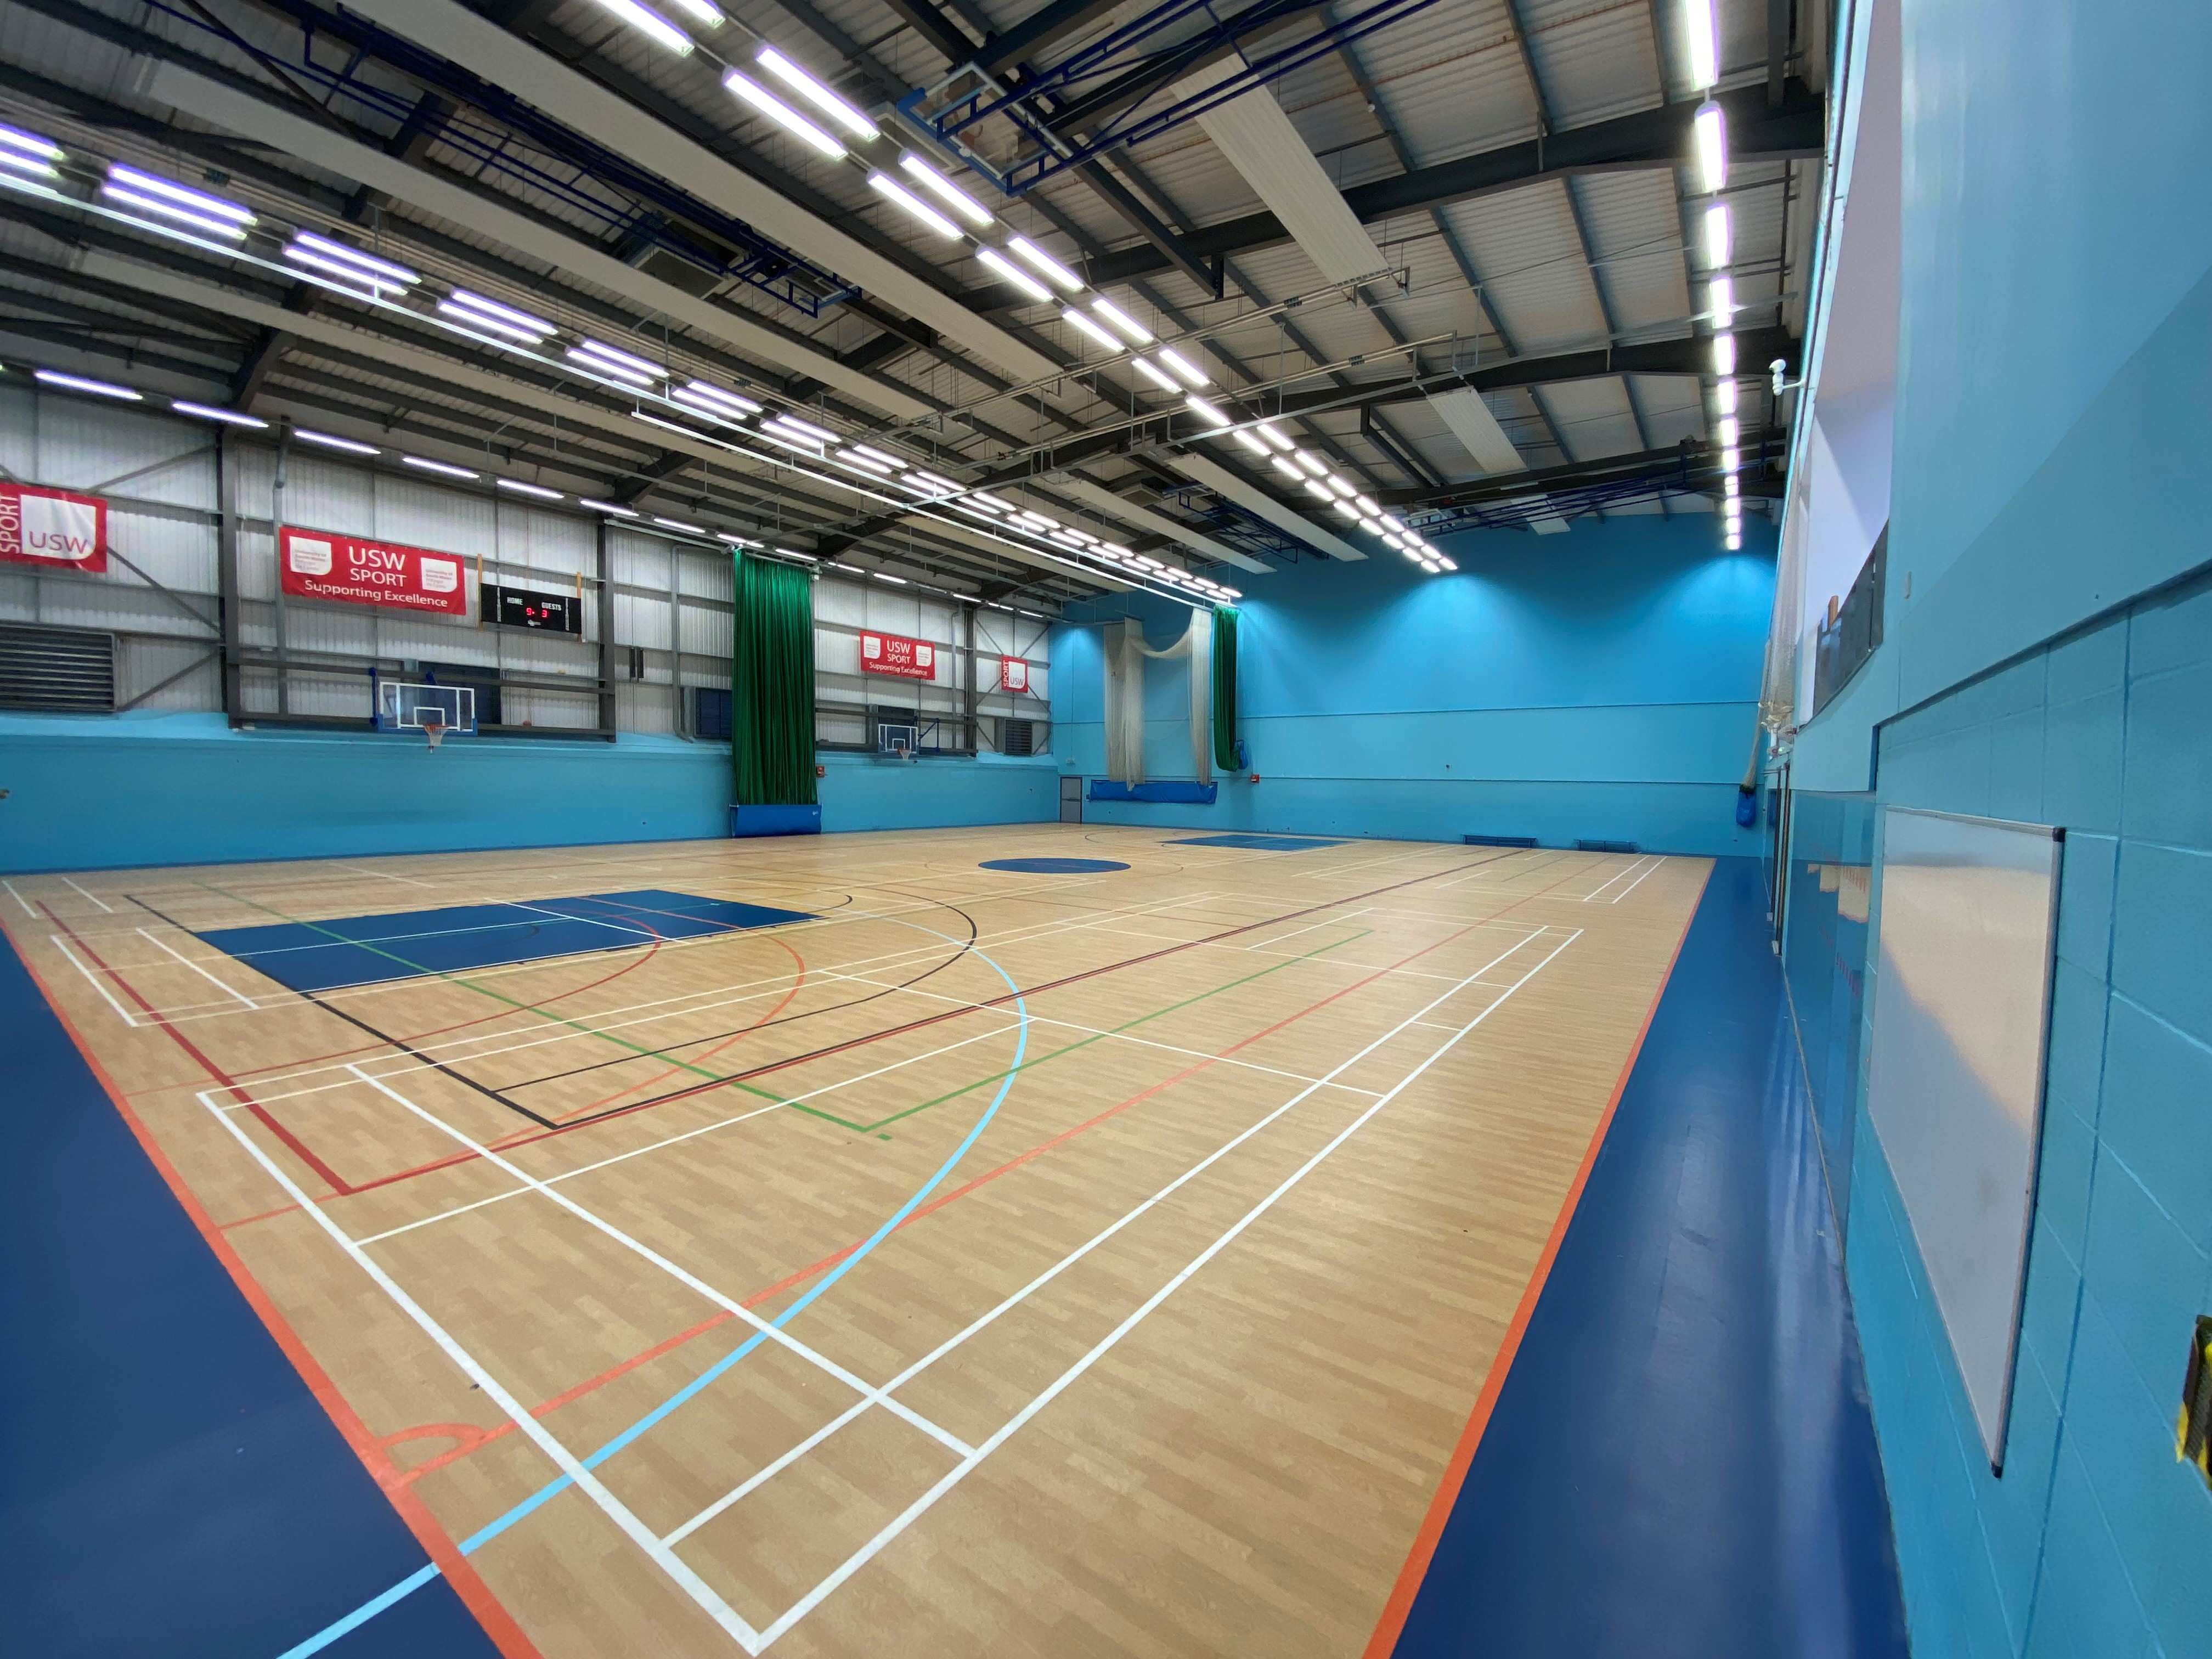 University of South Wales sports flooring